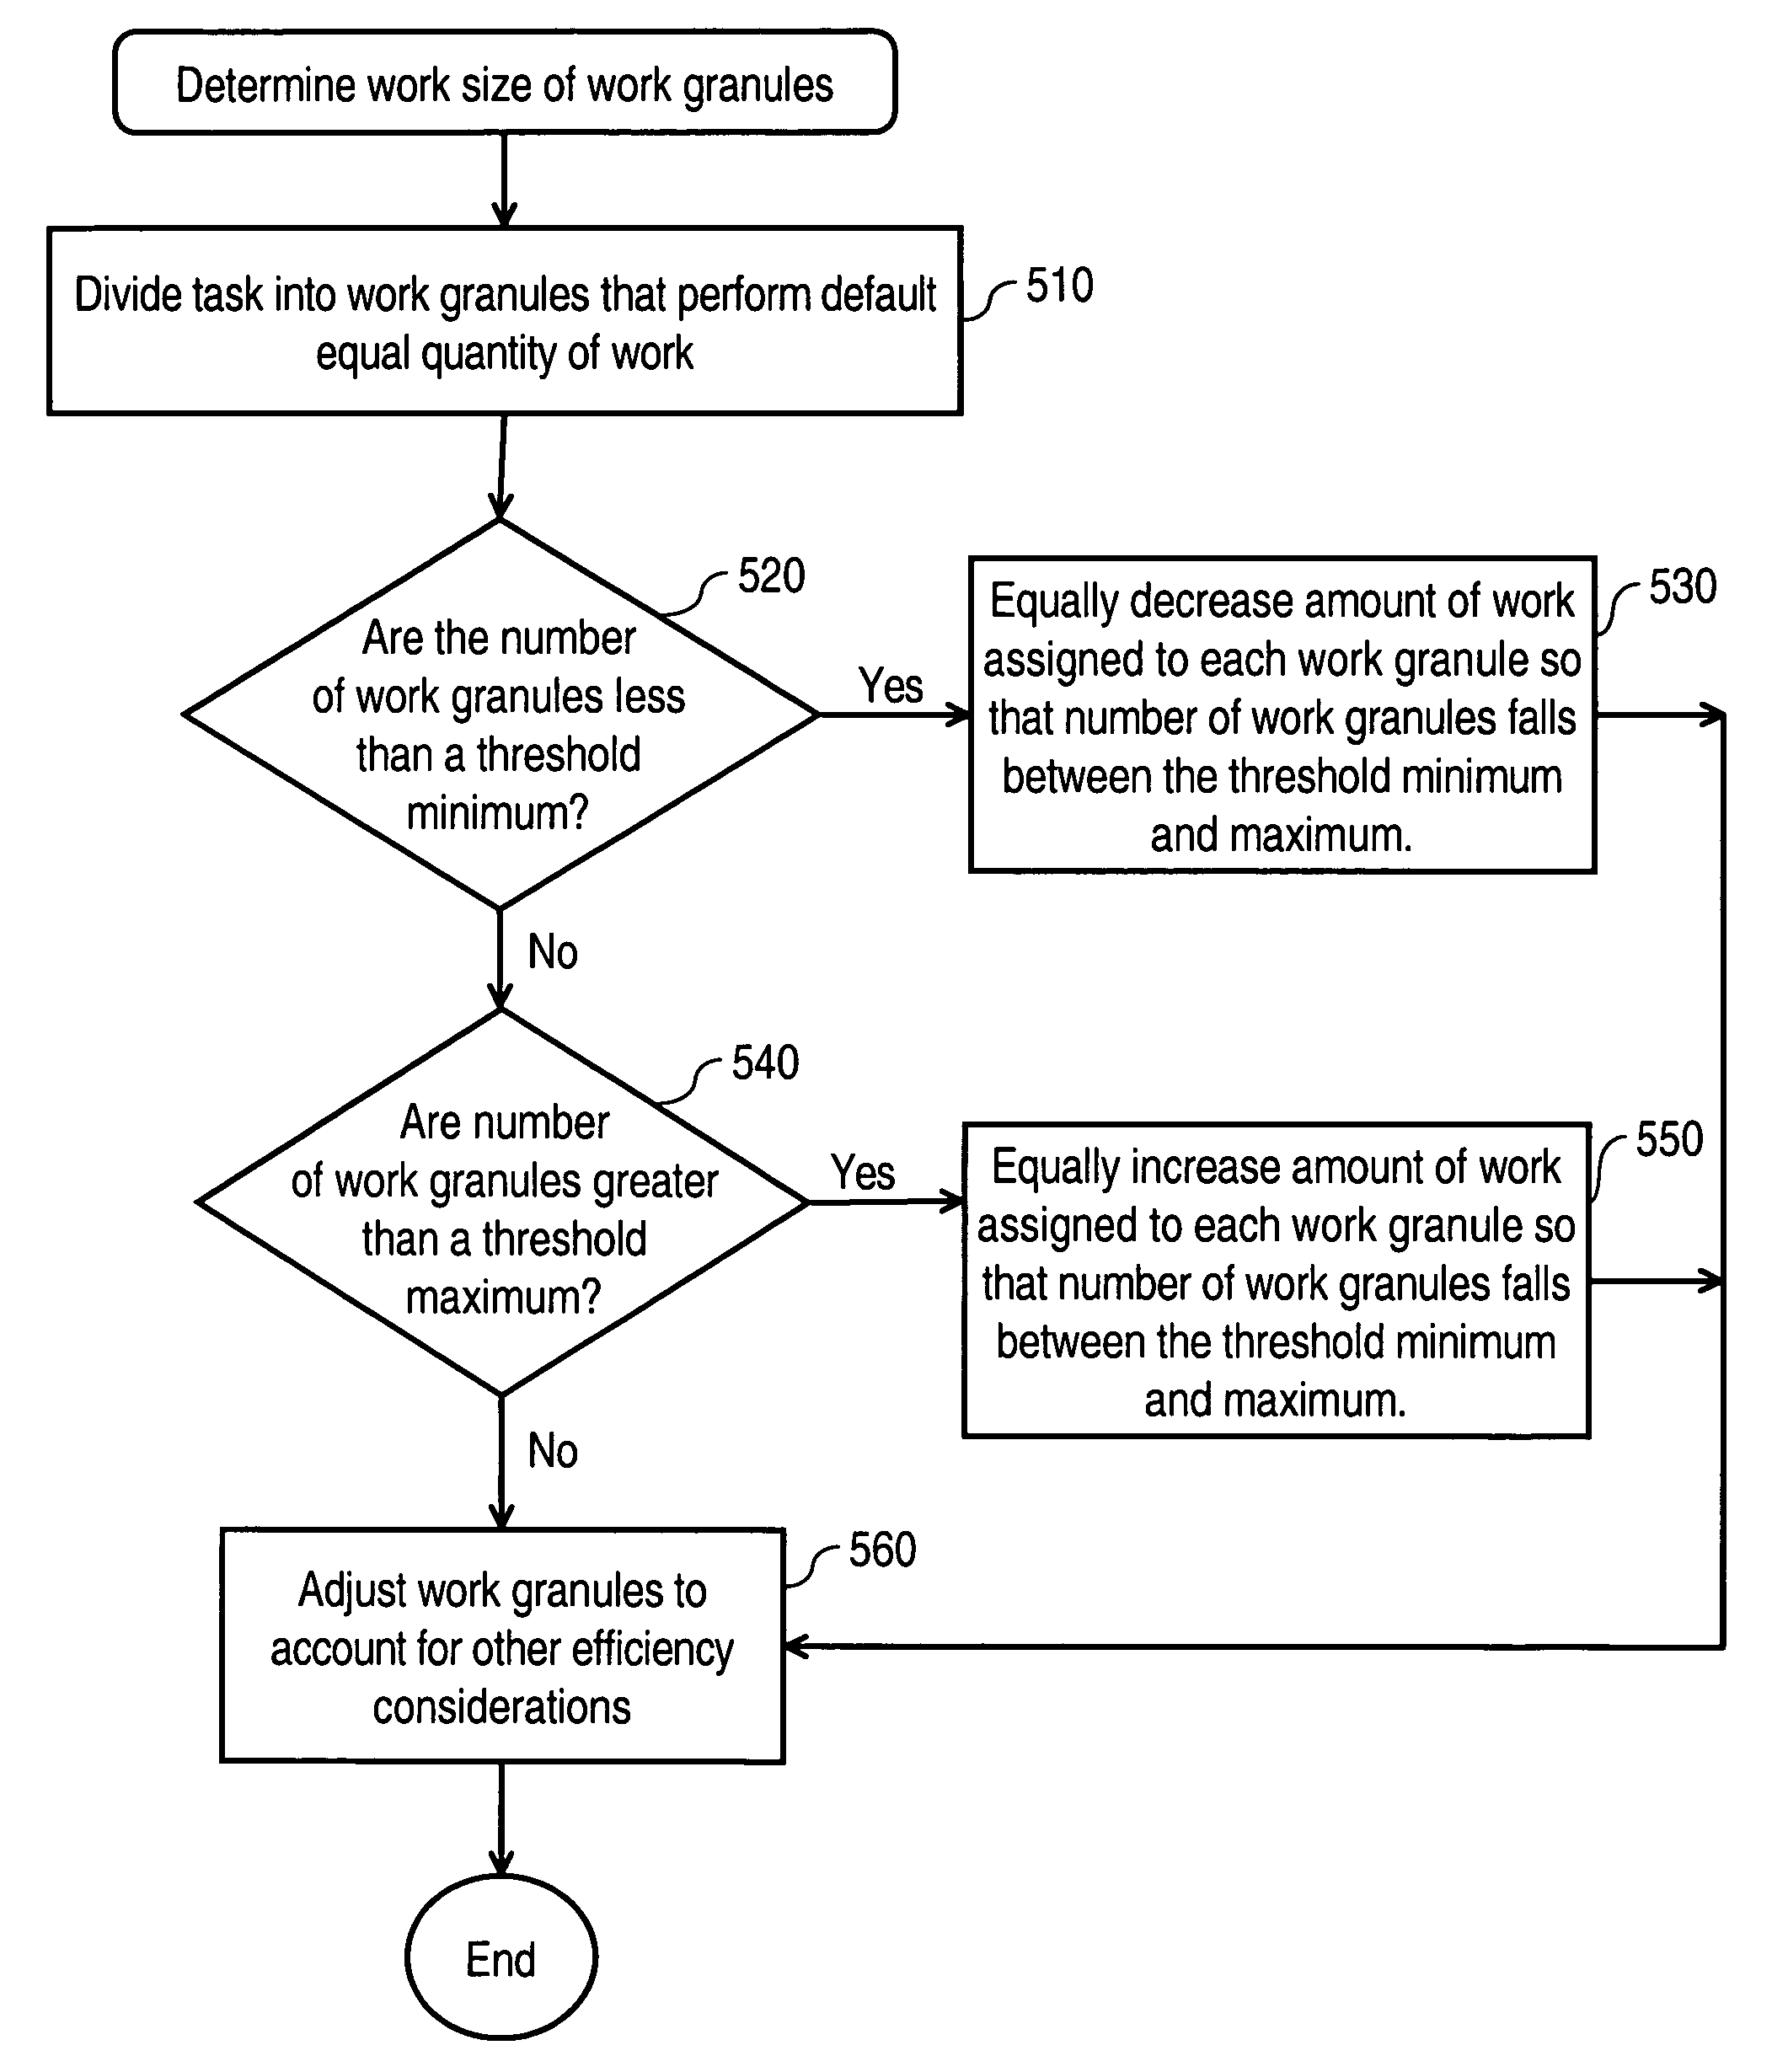 Managing parallel execution of work granules according to their affinity